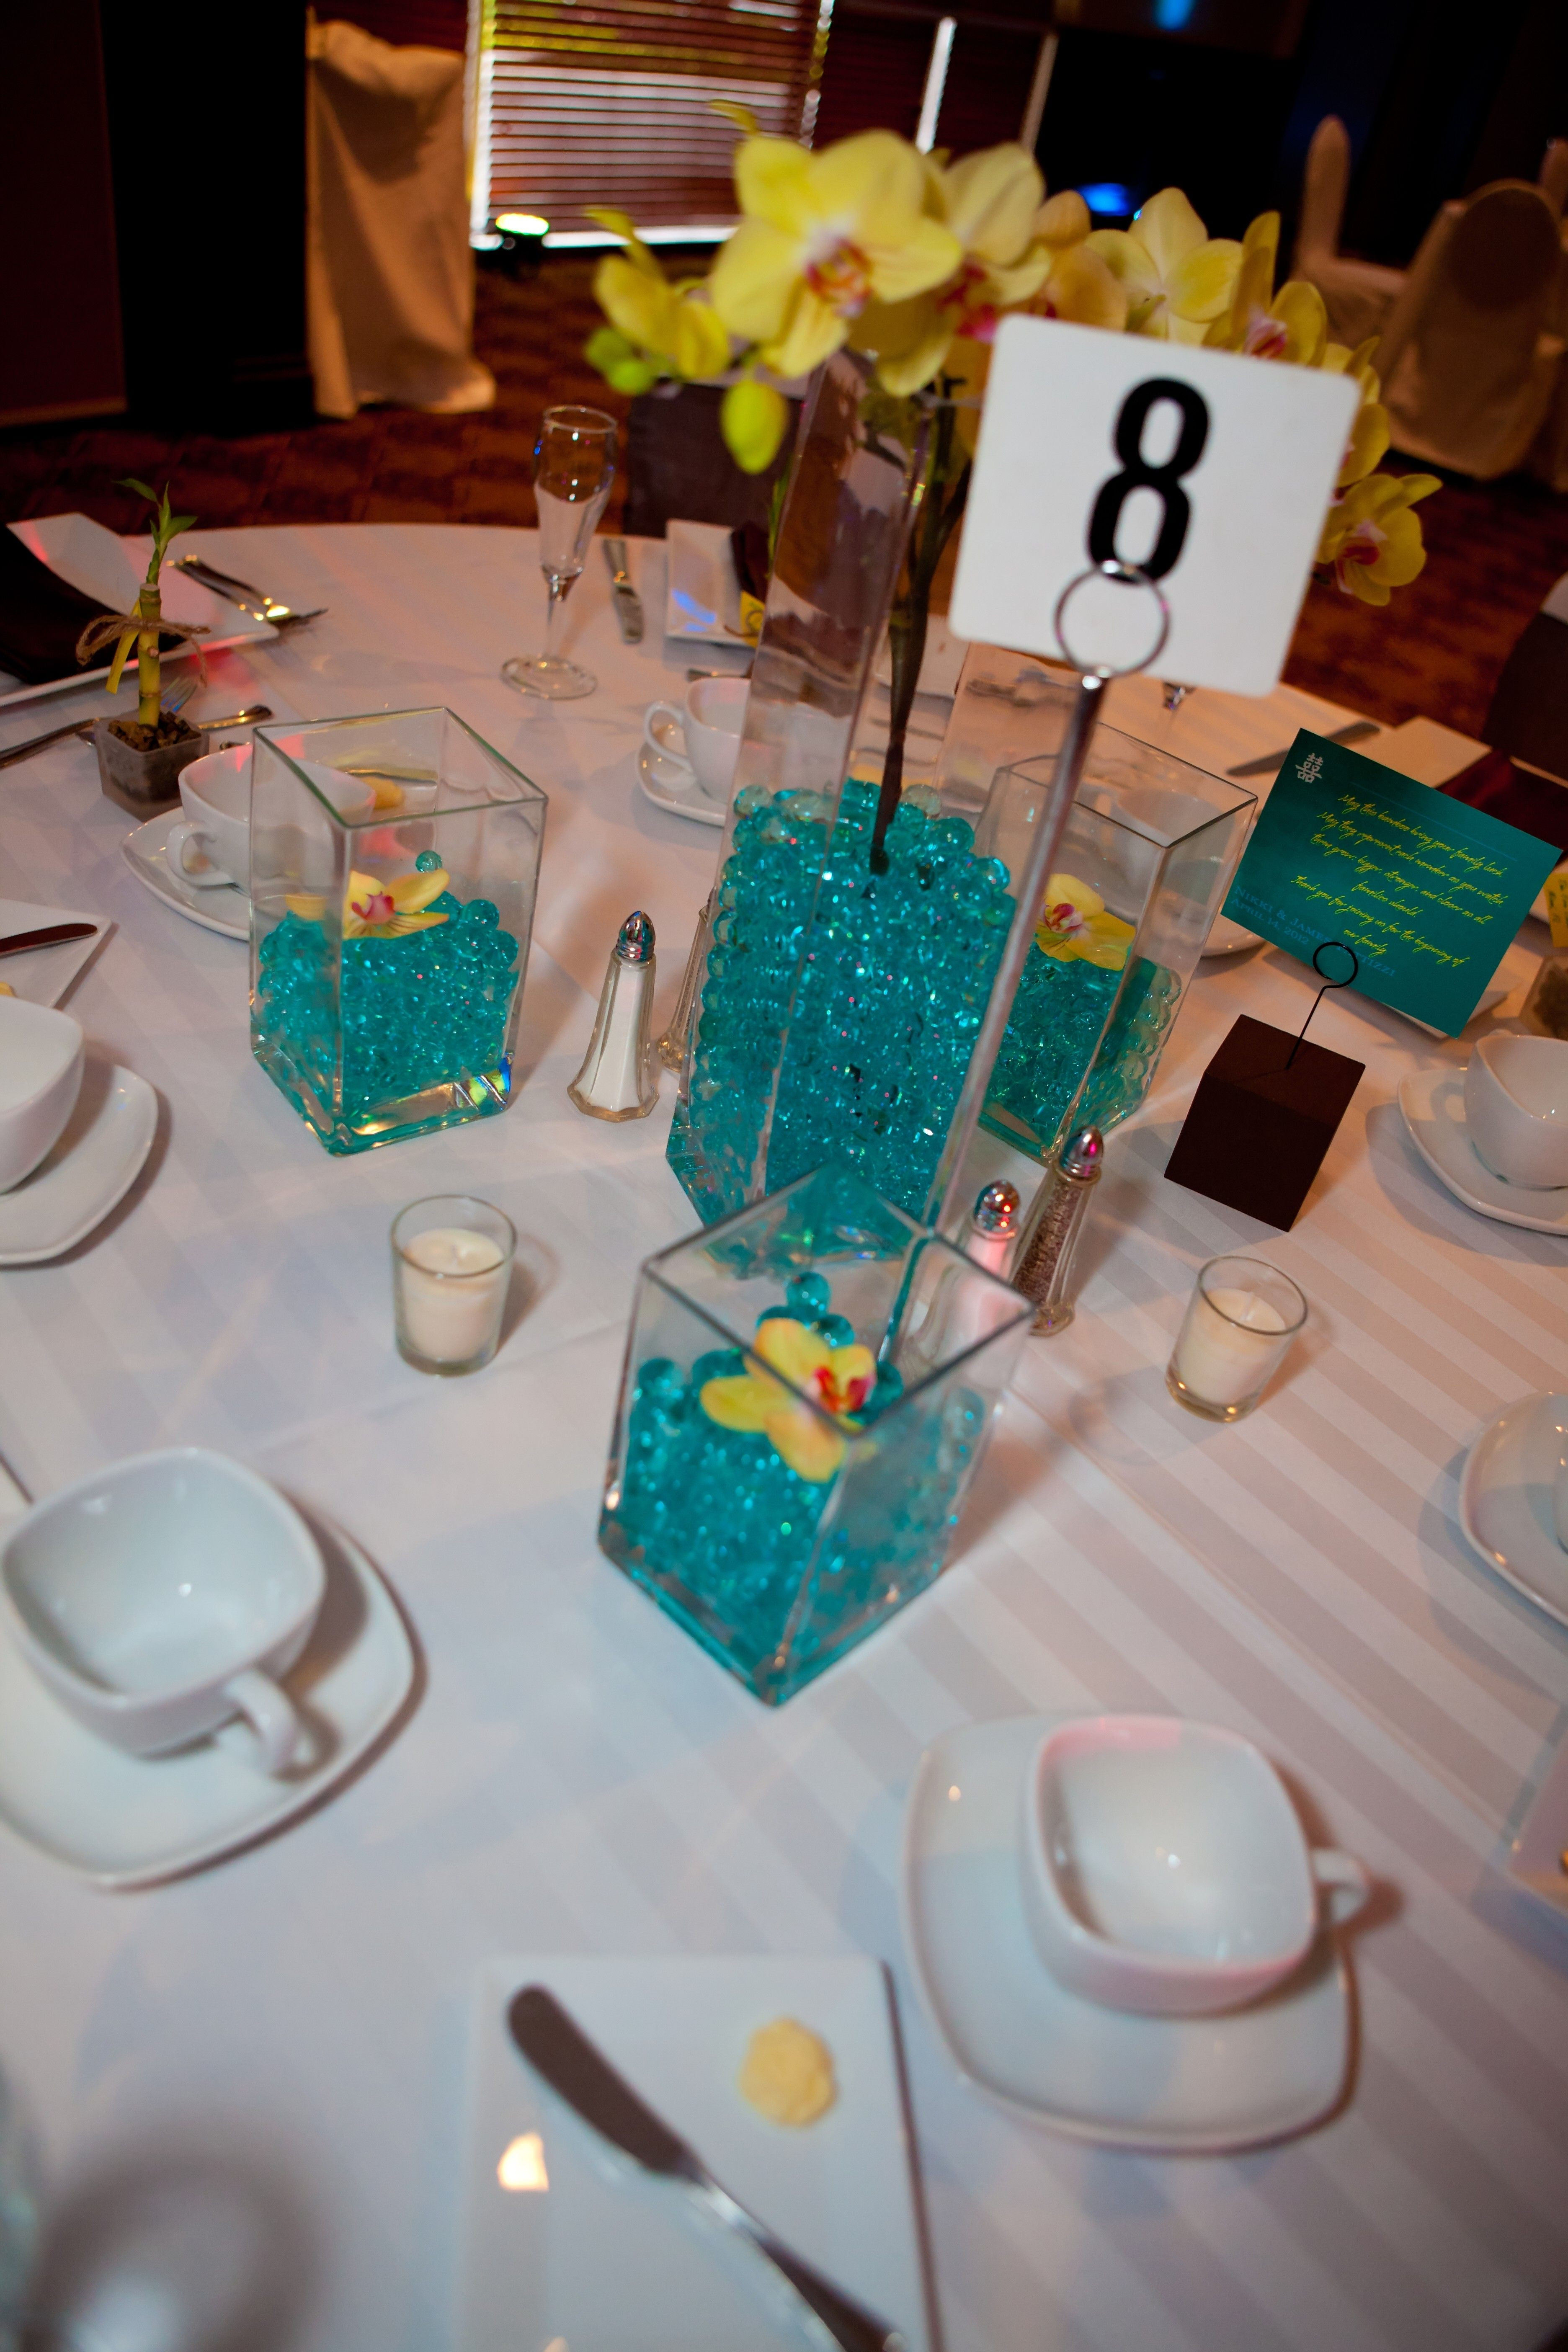 14 Lovable Blue Square Vase 2024 free download blue square vase of wedding centerpieces square vases teal water beads yellow with square vases teal water beads yellow orchids candles